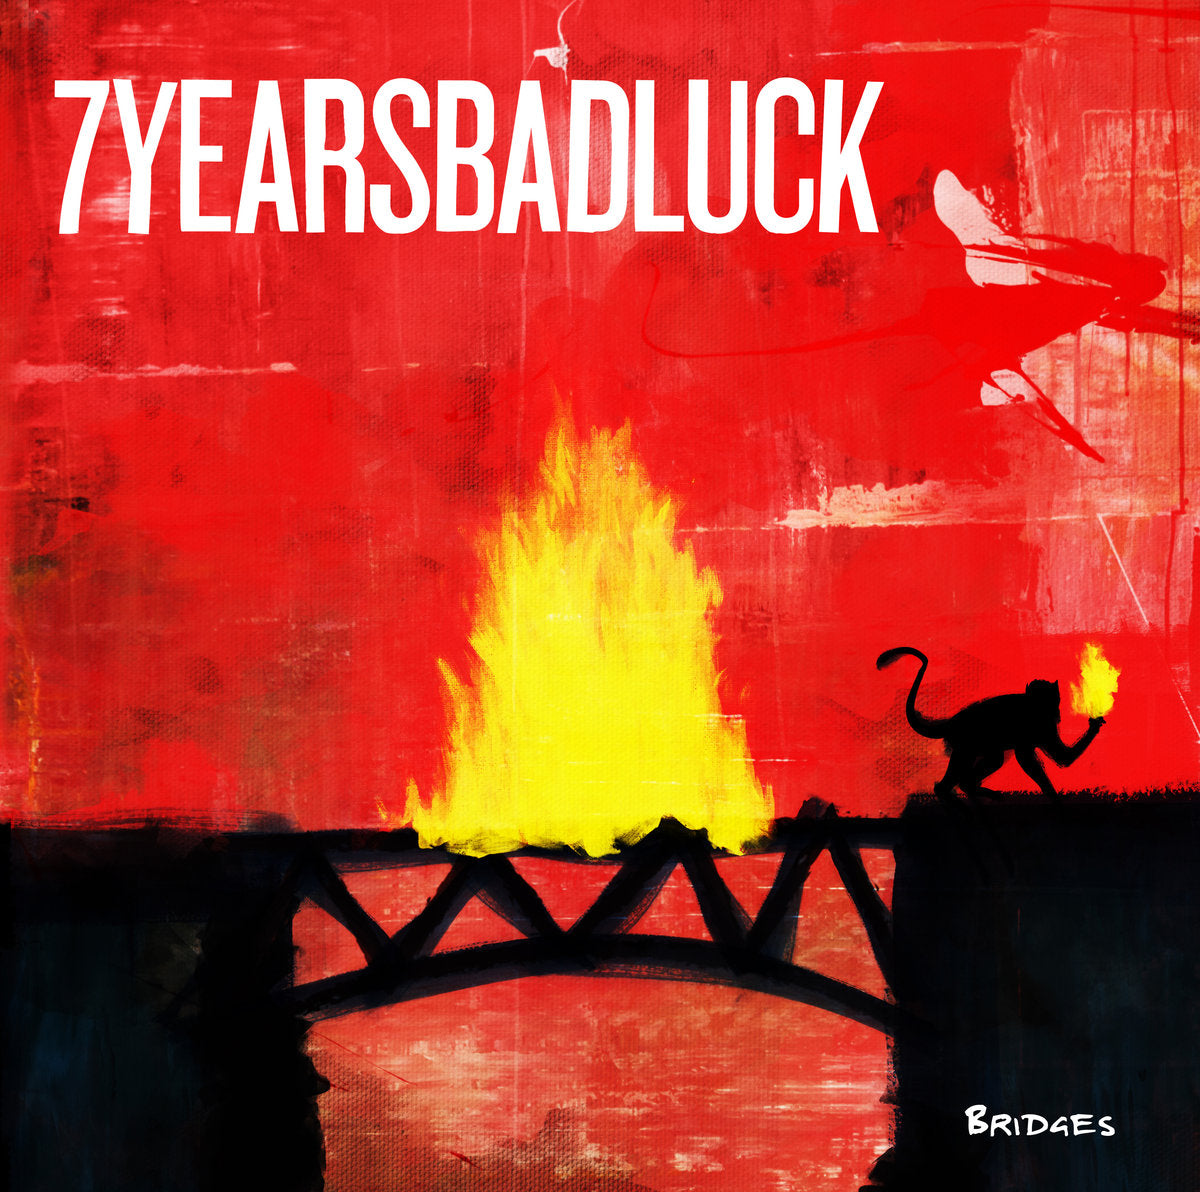 7 Years Bad Luck- Bridges LP ~FACE TO FACE!